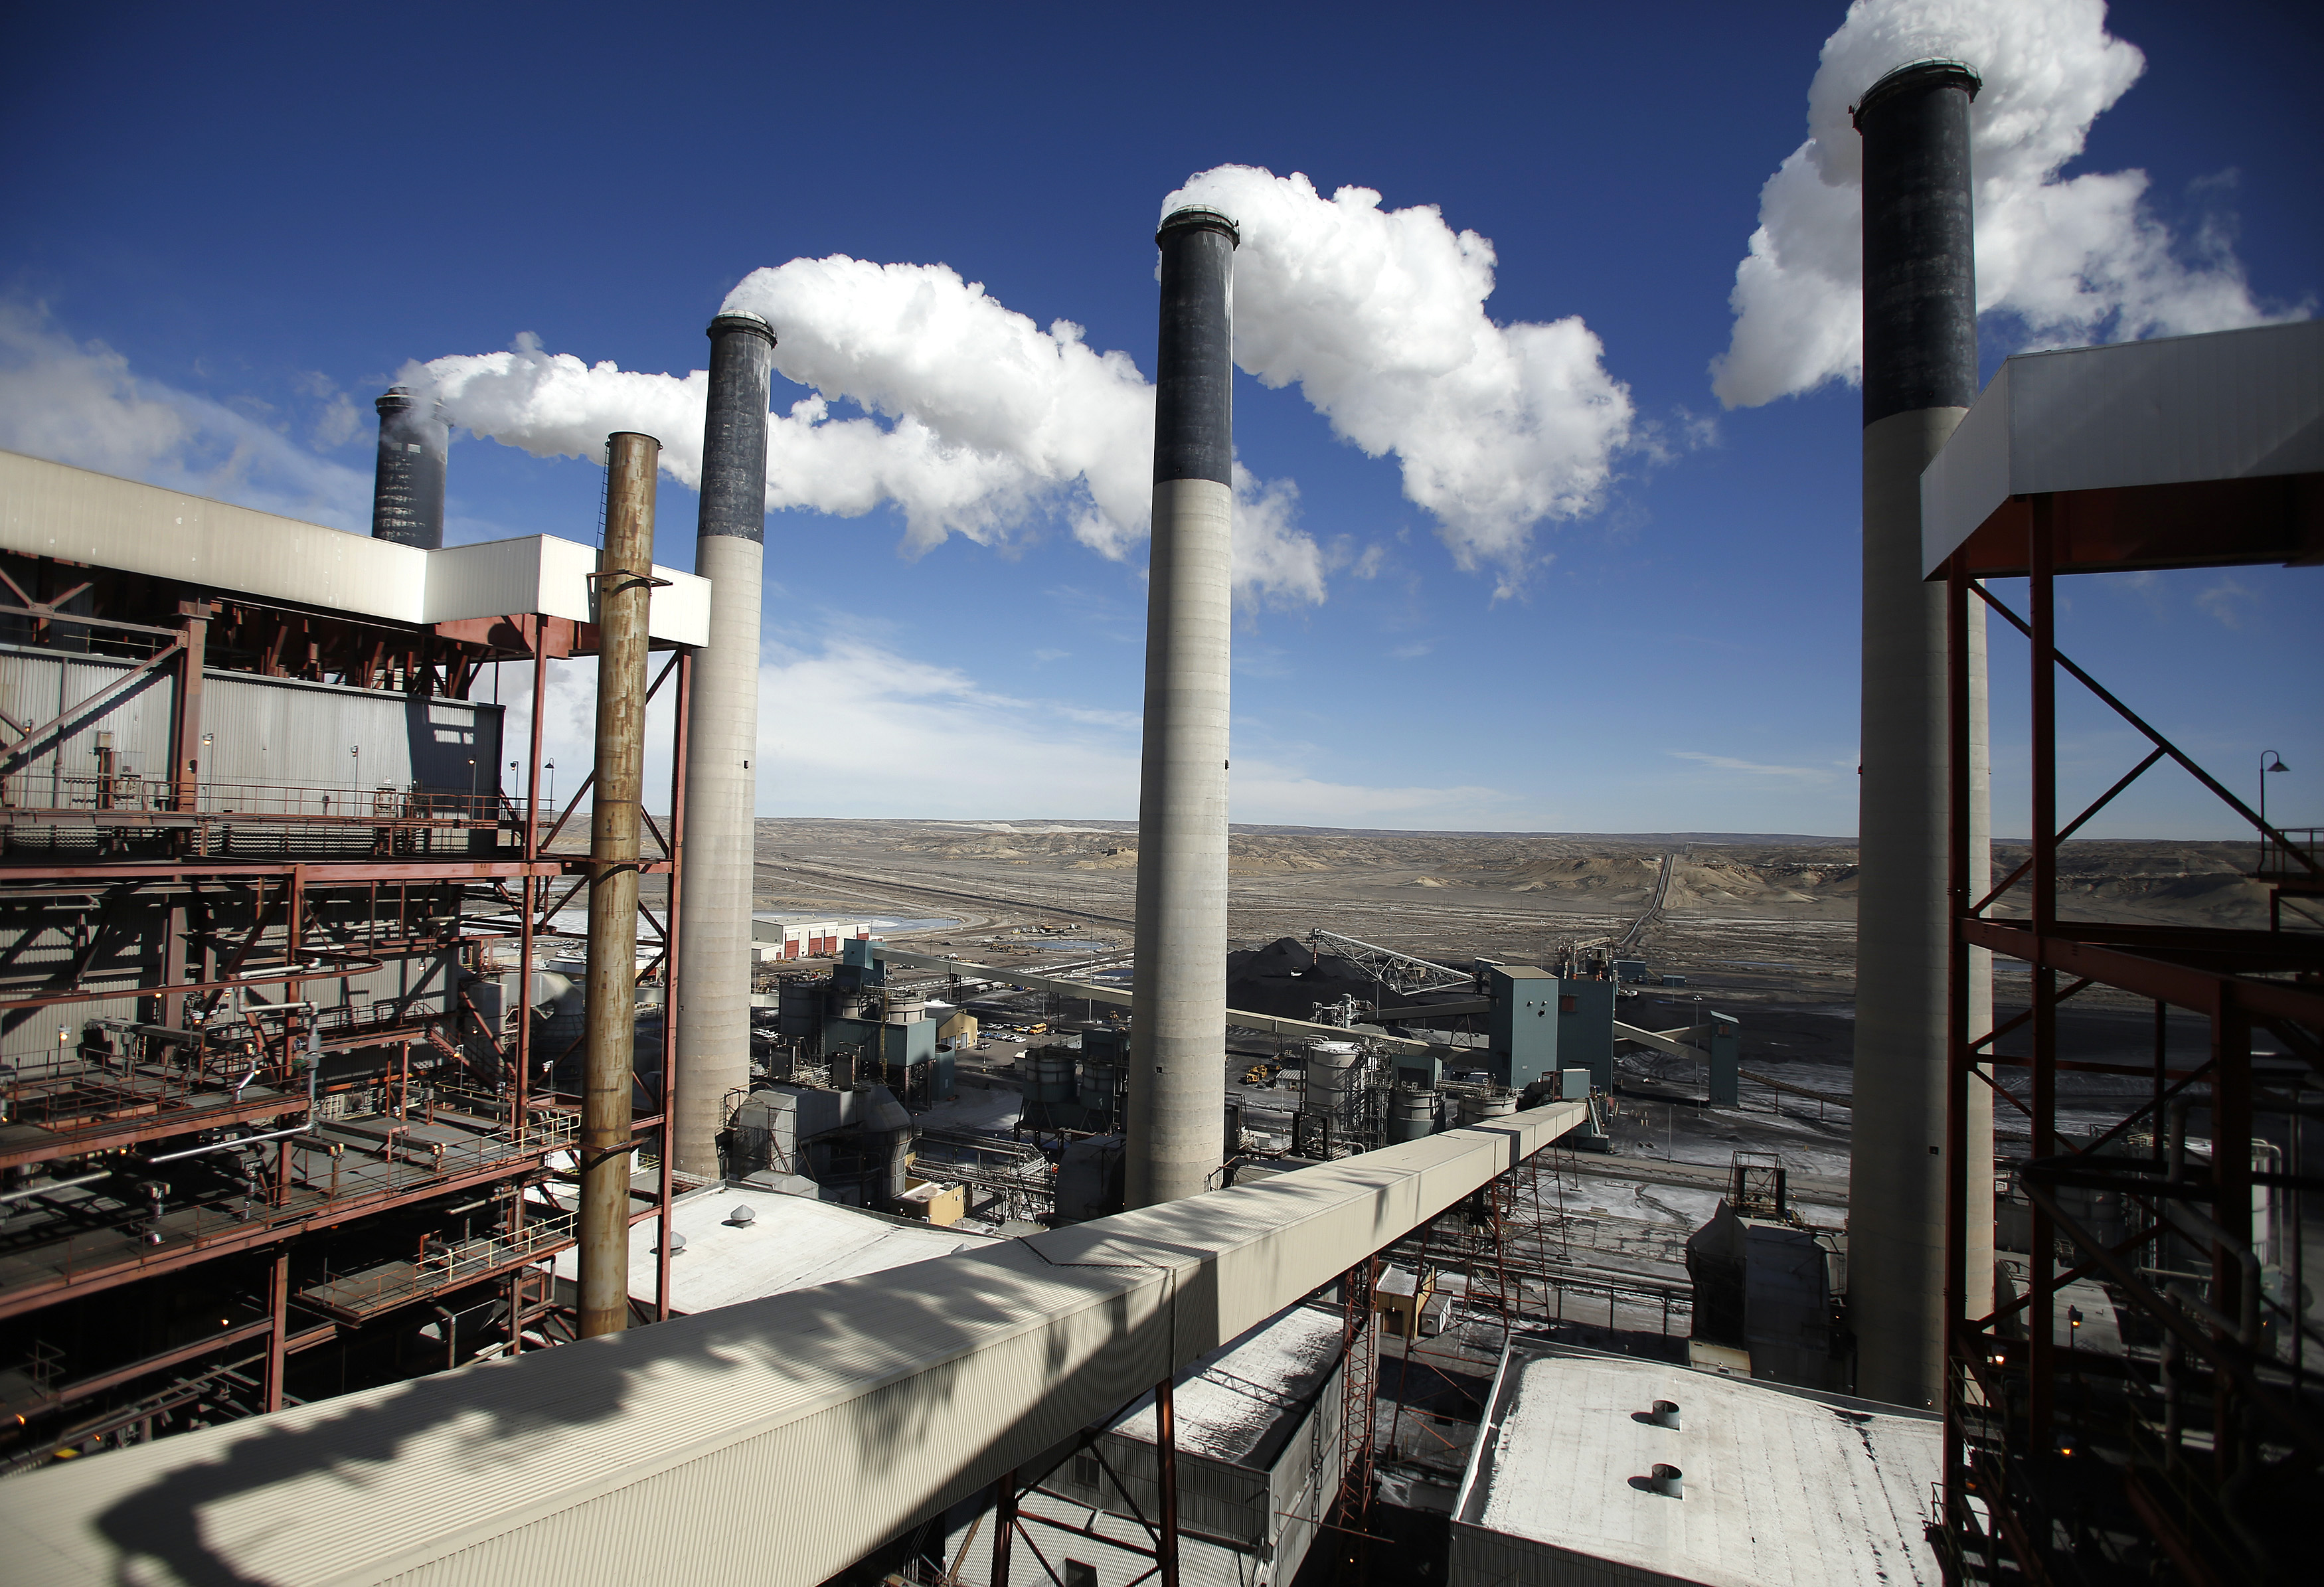 Steam rises from the stakes of the coal-fired Jim Bridger Power Plant supplied by the neighboring Jim Bridger mine that is owned by energy firm PacifiCorp and the Idaho Power Company, outside Point of the Rocks, Wyoming, March 14, 2014. REUTERS/Jim Urquhart